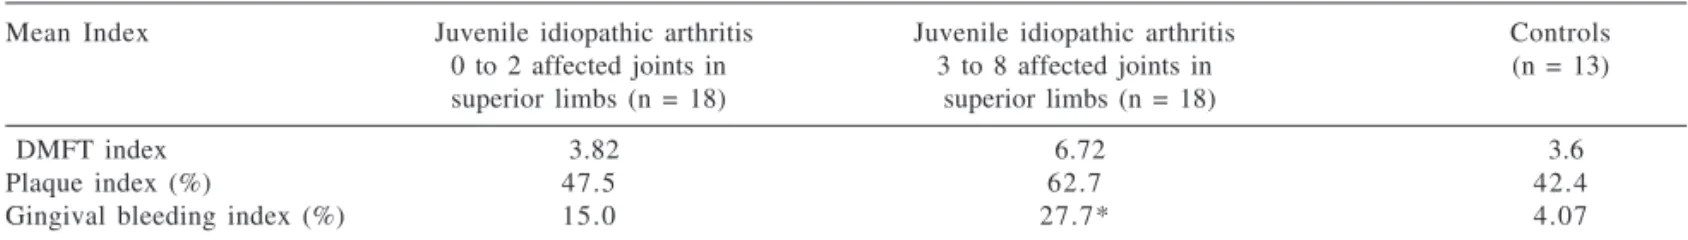 Table 3 - Dental and gingival findings in patients with juvenile idiopathic arthritis according to the number of affected joints in superior limbs, compared with the control group.